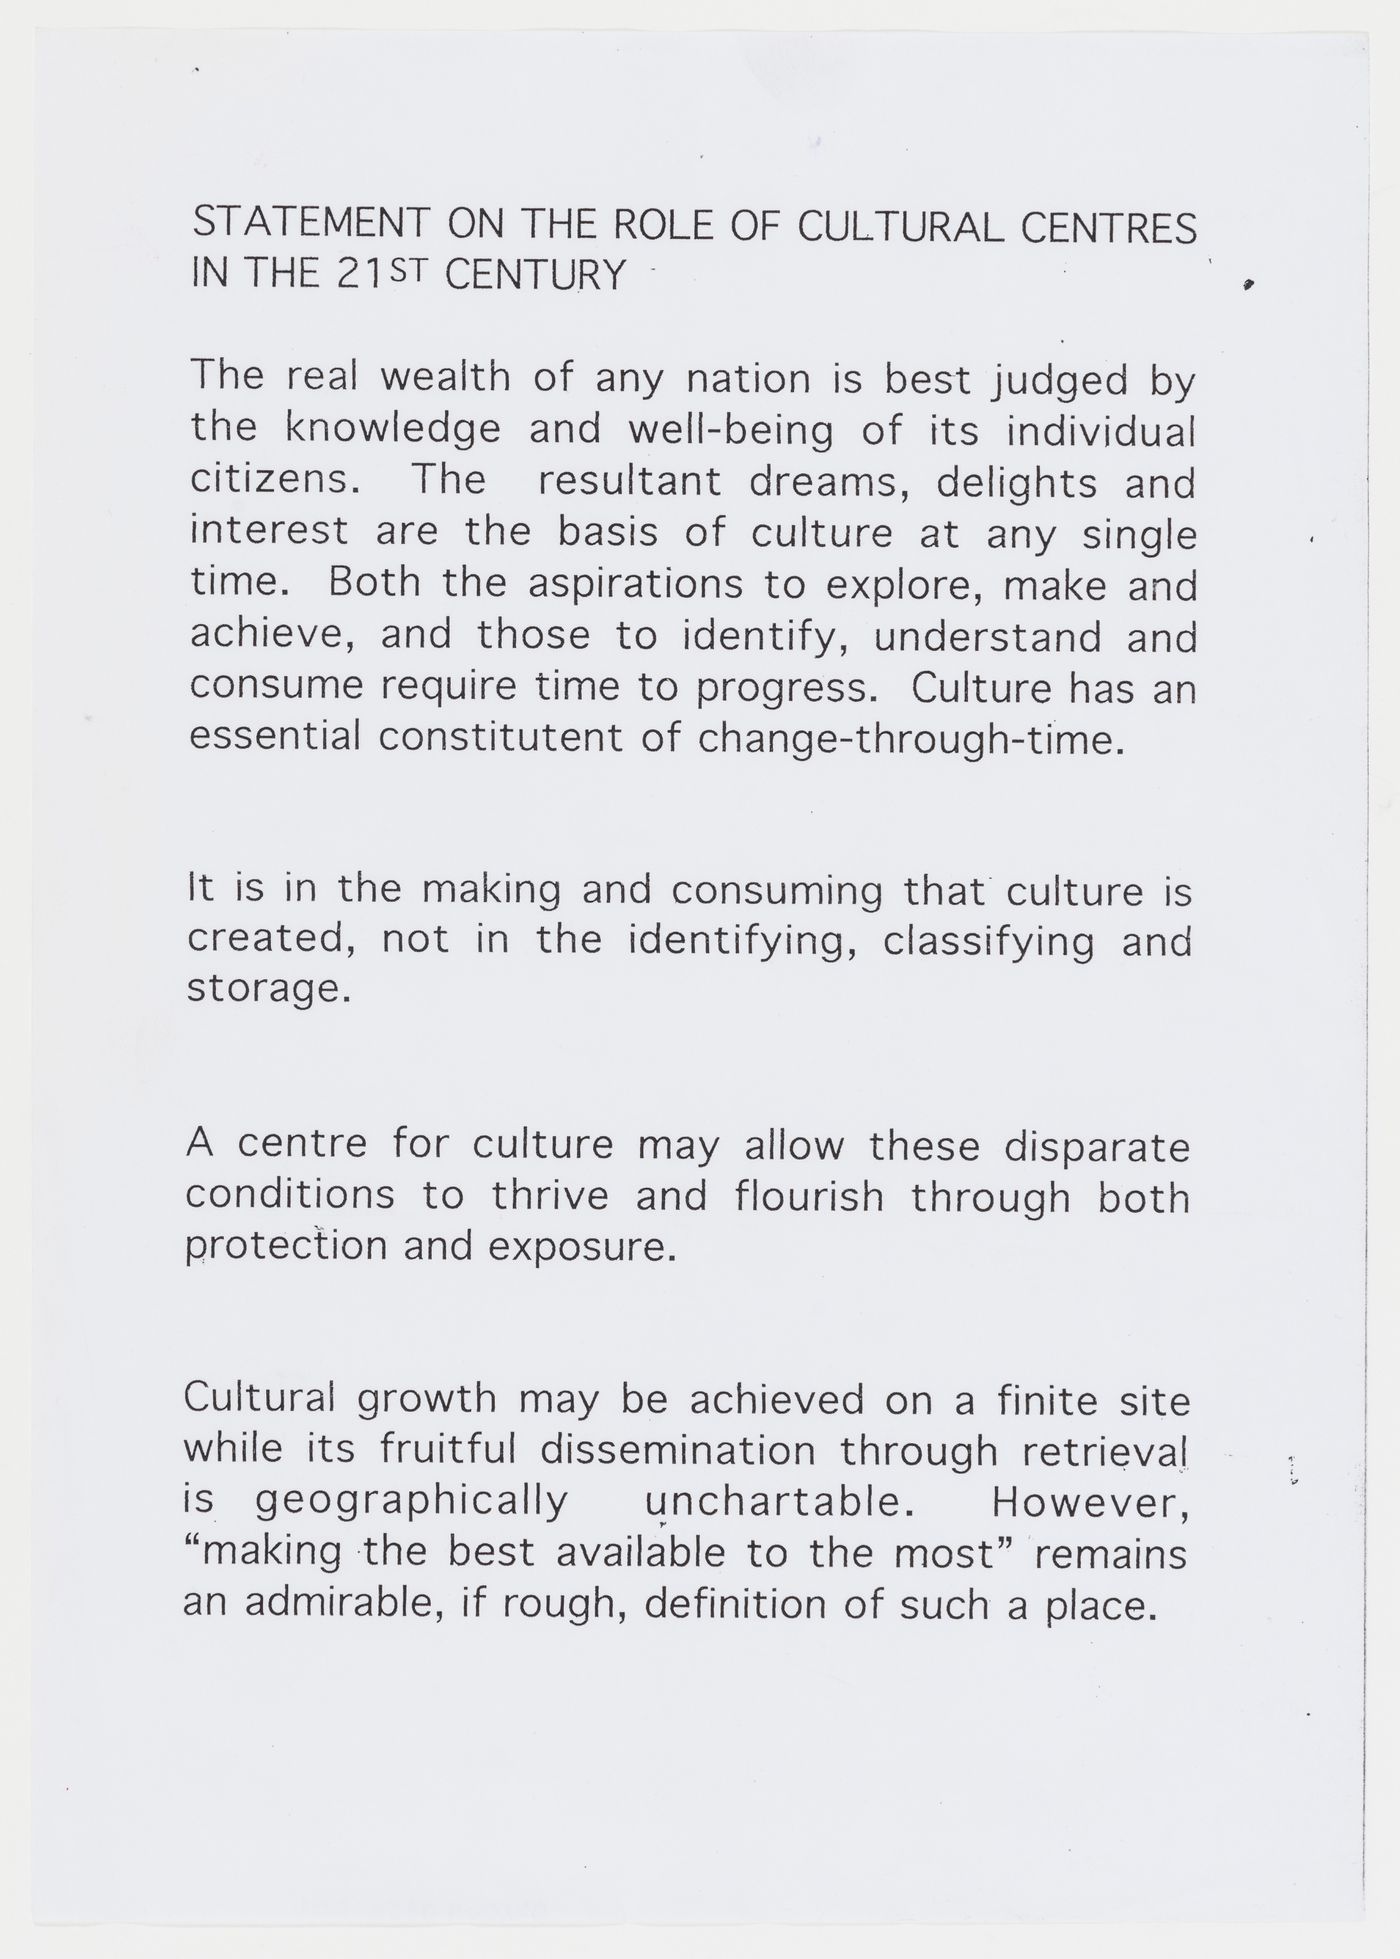 Text entitled "Statement on the role of cultural centres in the 21st Century" (first of two sheets) - from the project file "IFPRI"